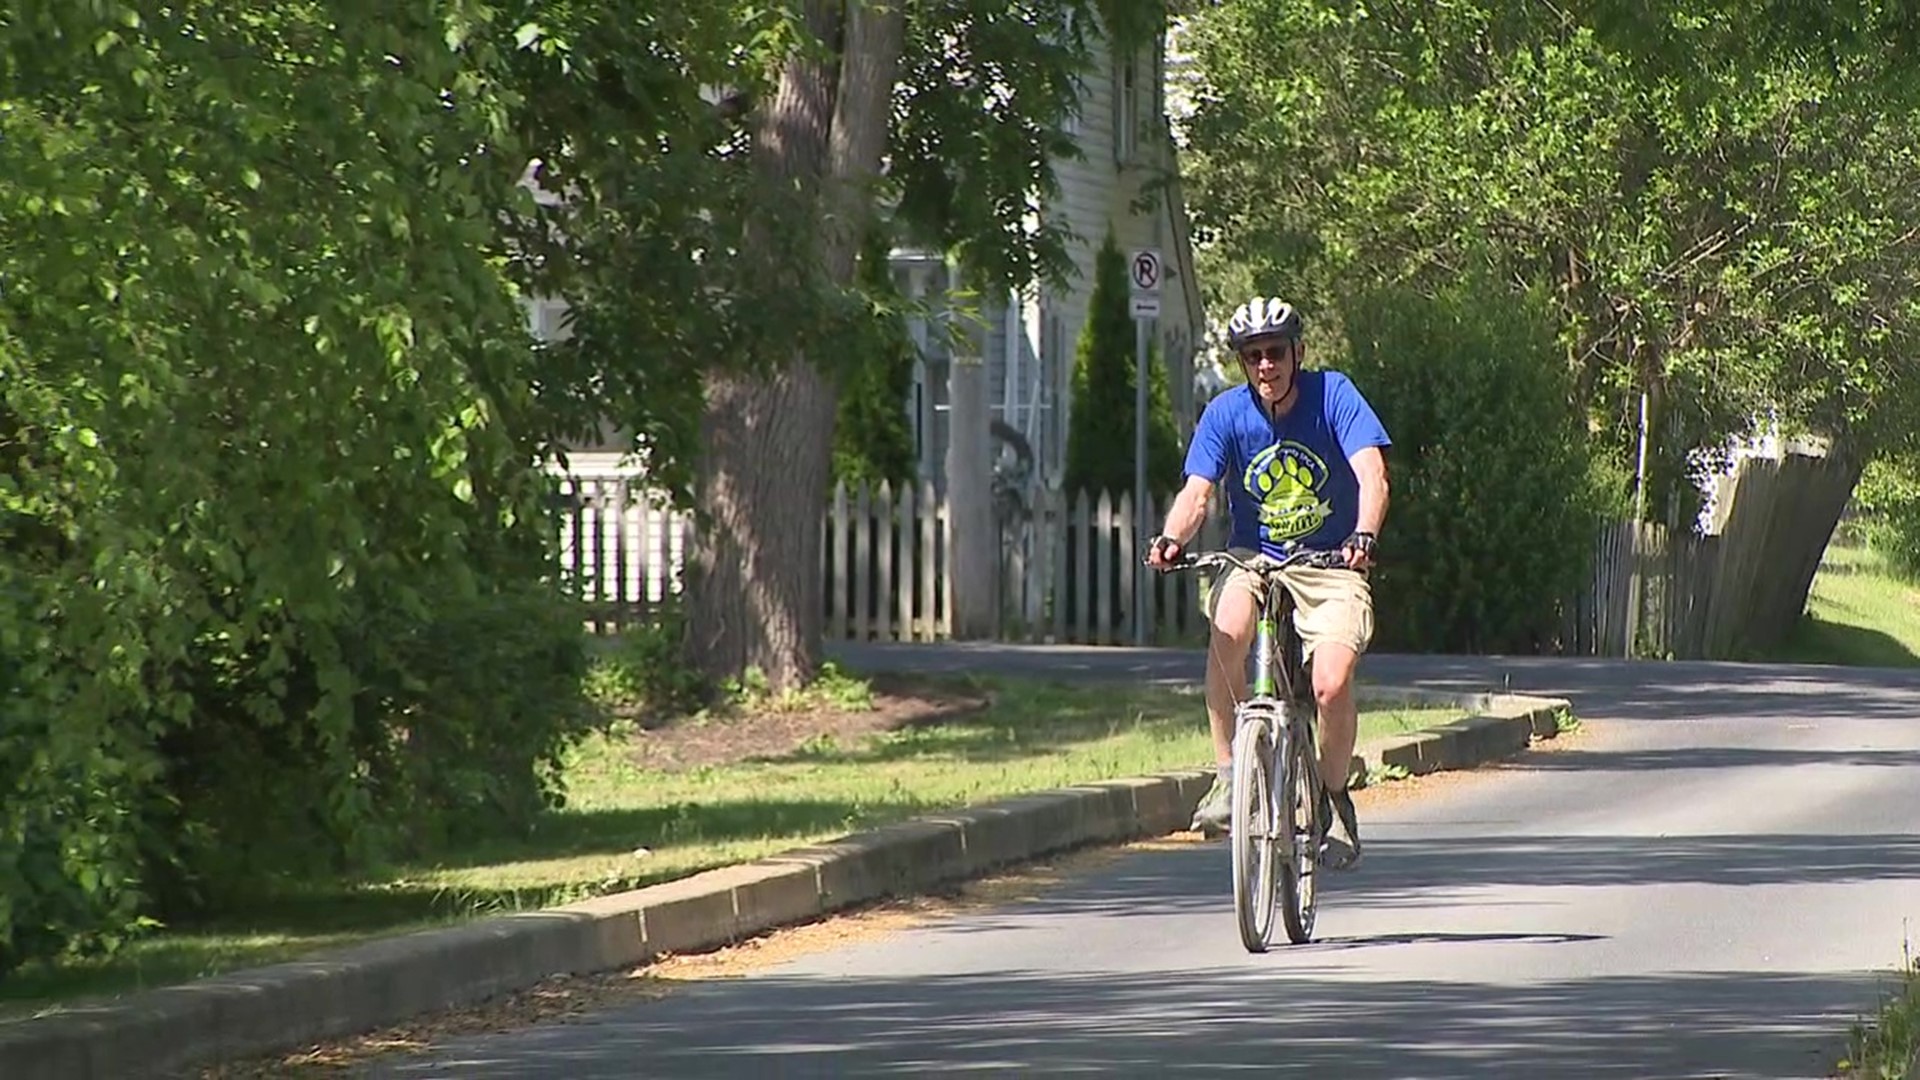 Some groups in Lewisburg are encouraging people to get on their bikes and ride.